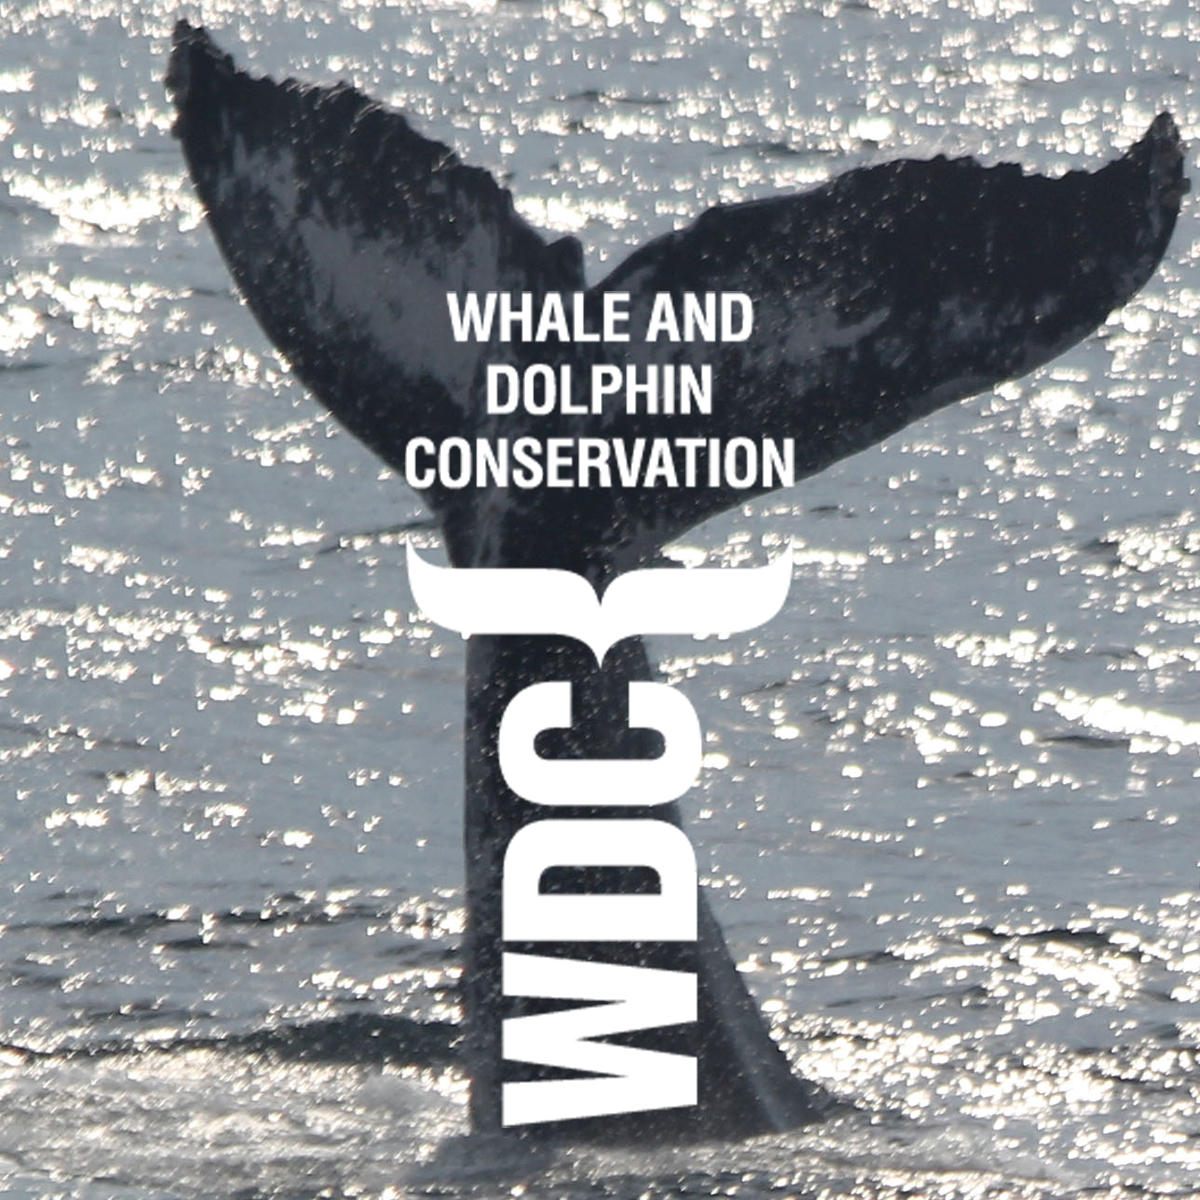 Image of Whale Tale going into ocean, with the Whale And Dolphin Conservation text overlaid on top.